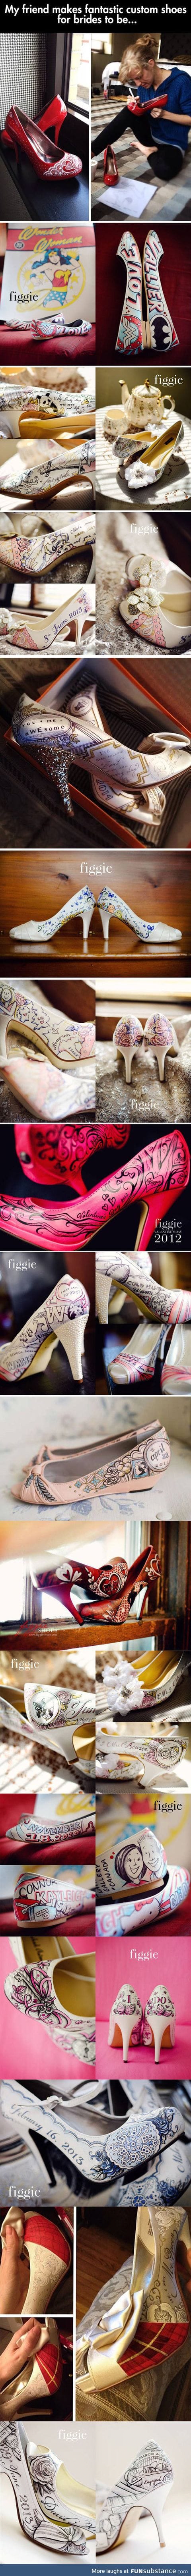 Stunning customized shoes